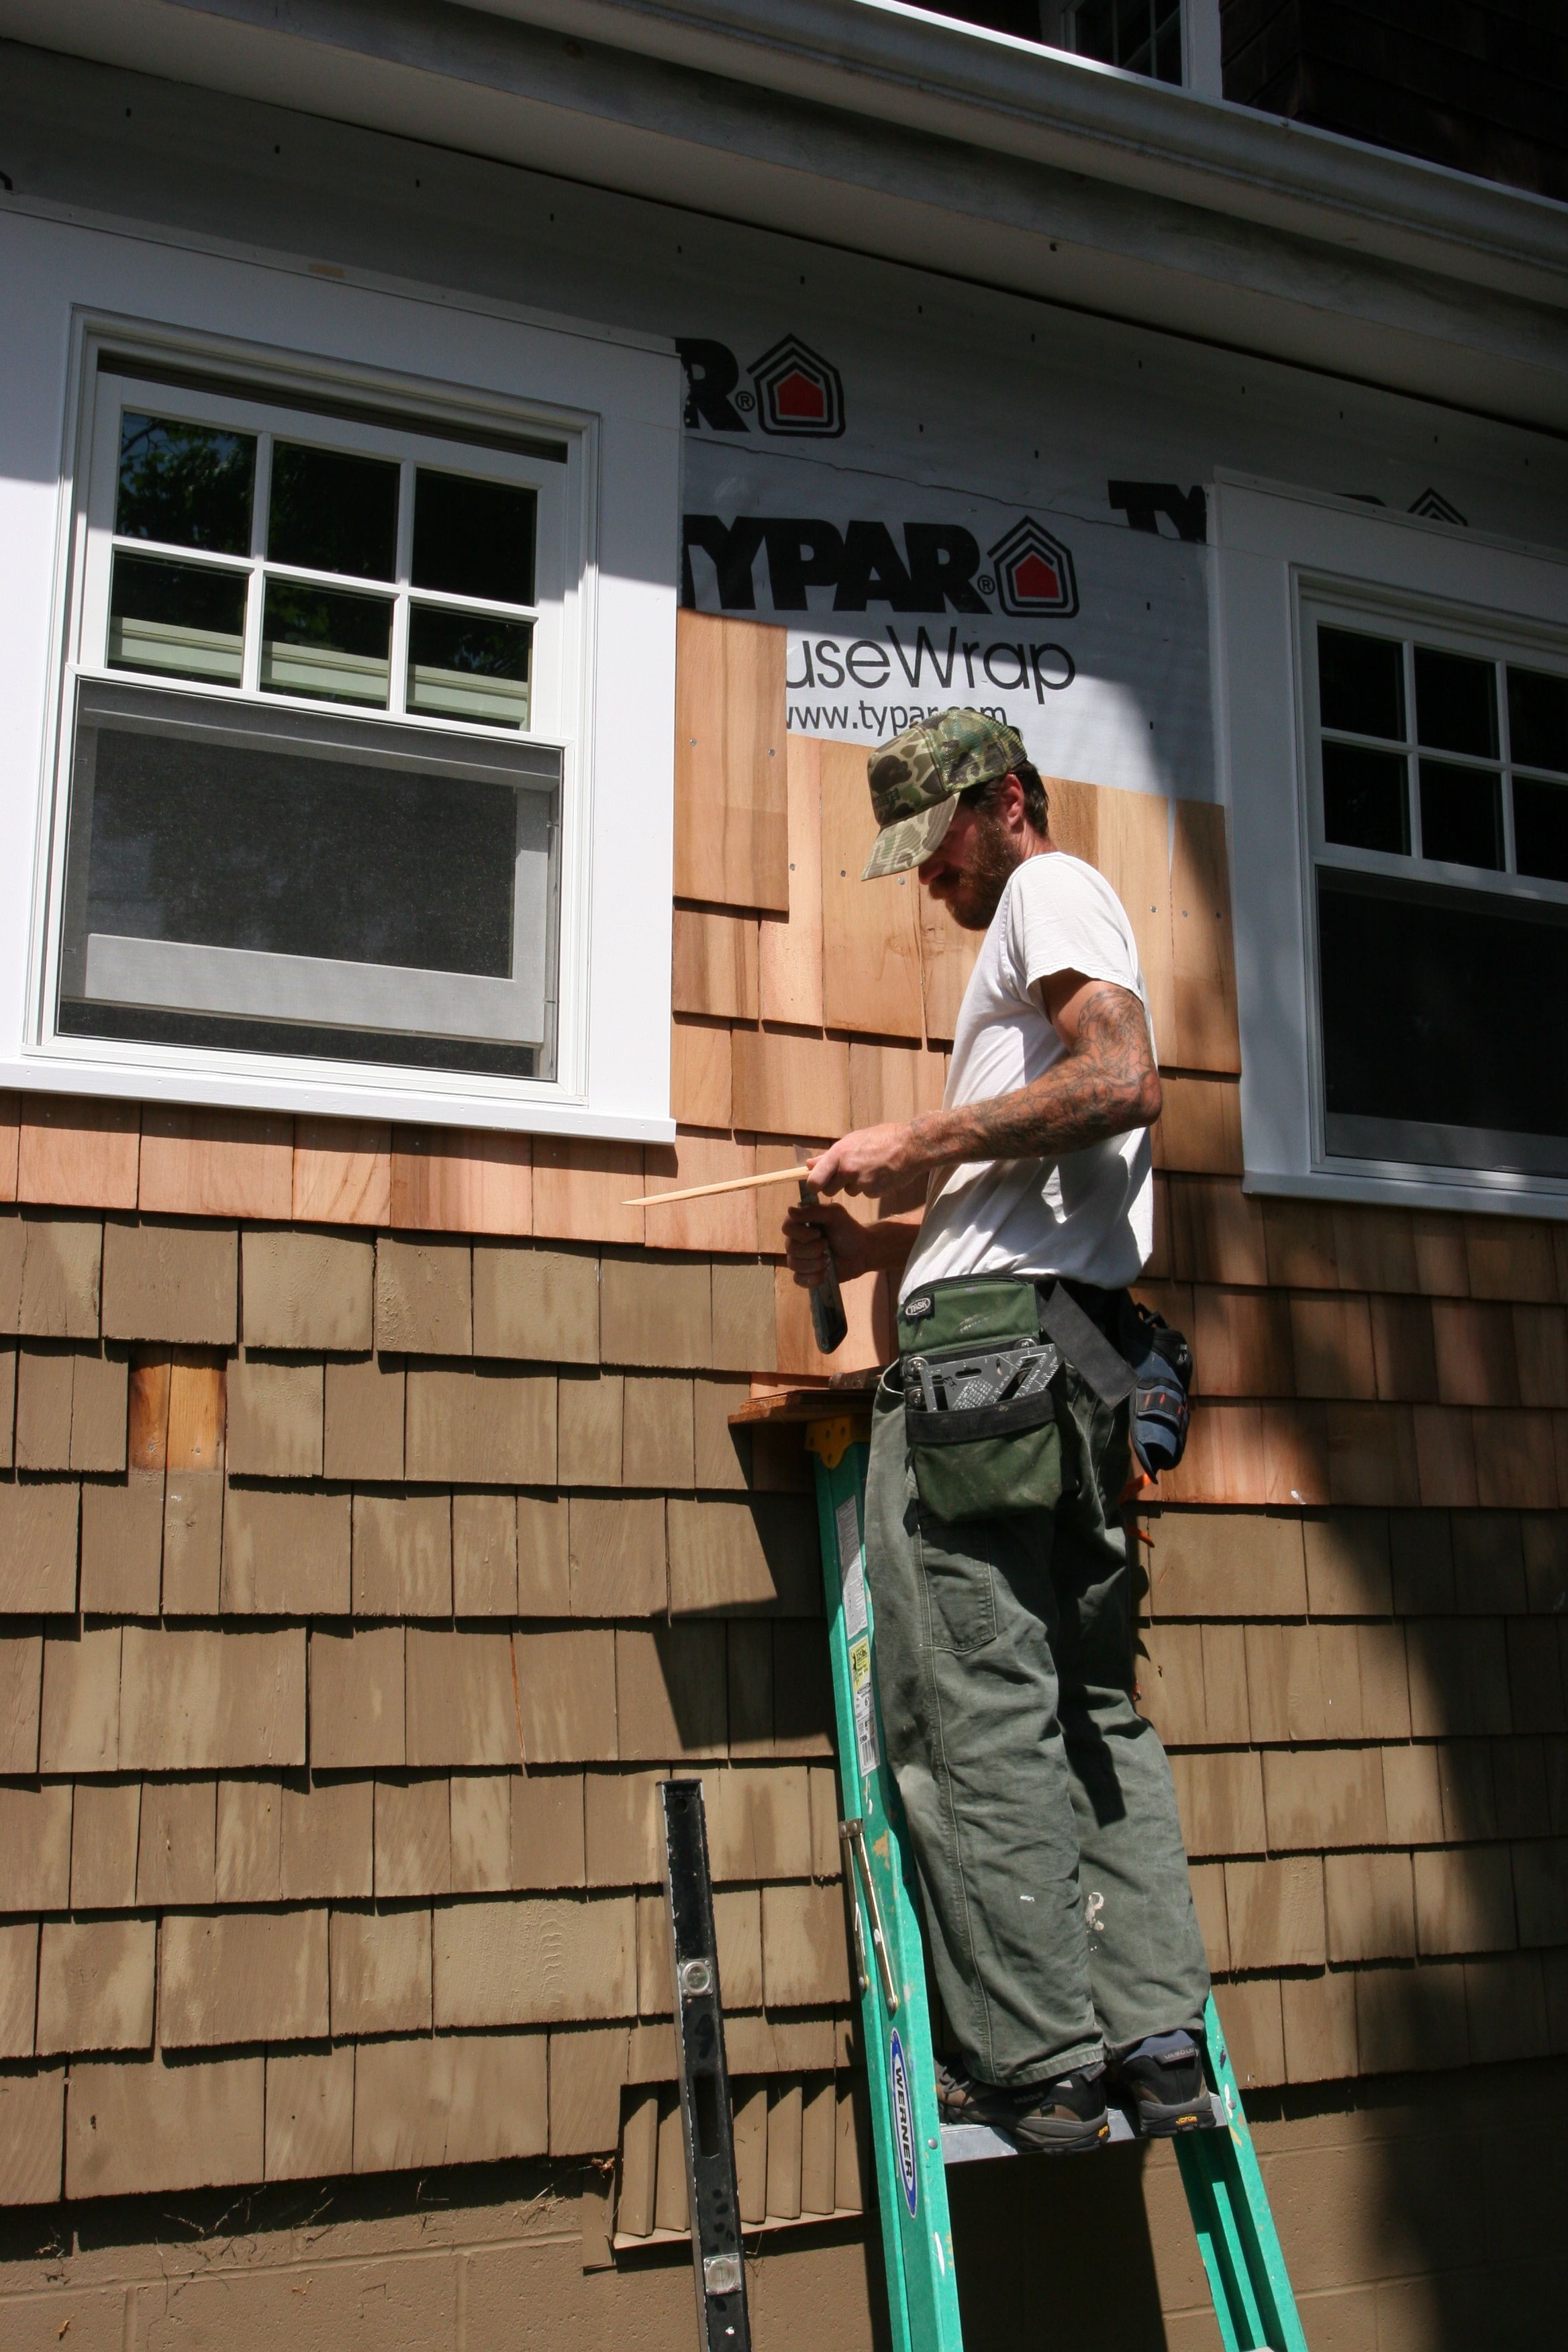 Eric had to hand shape almost every shingle to make it fit. Such care, it touches my heart.